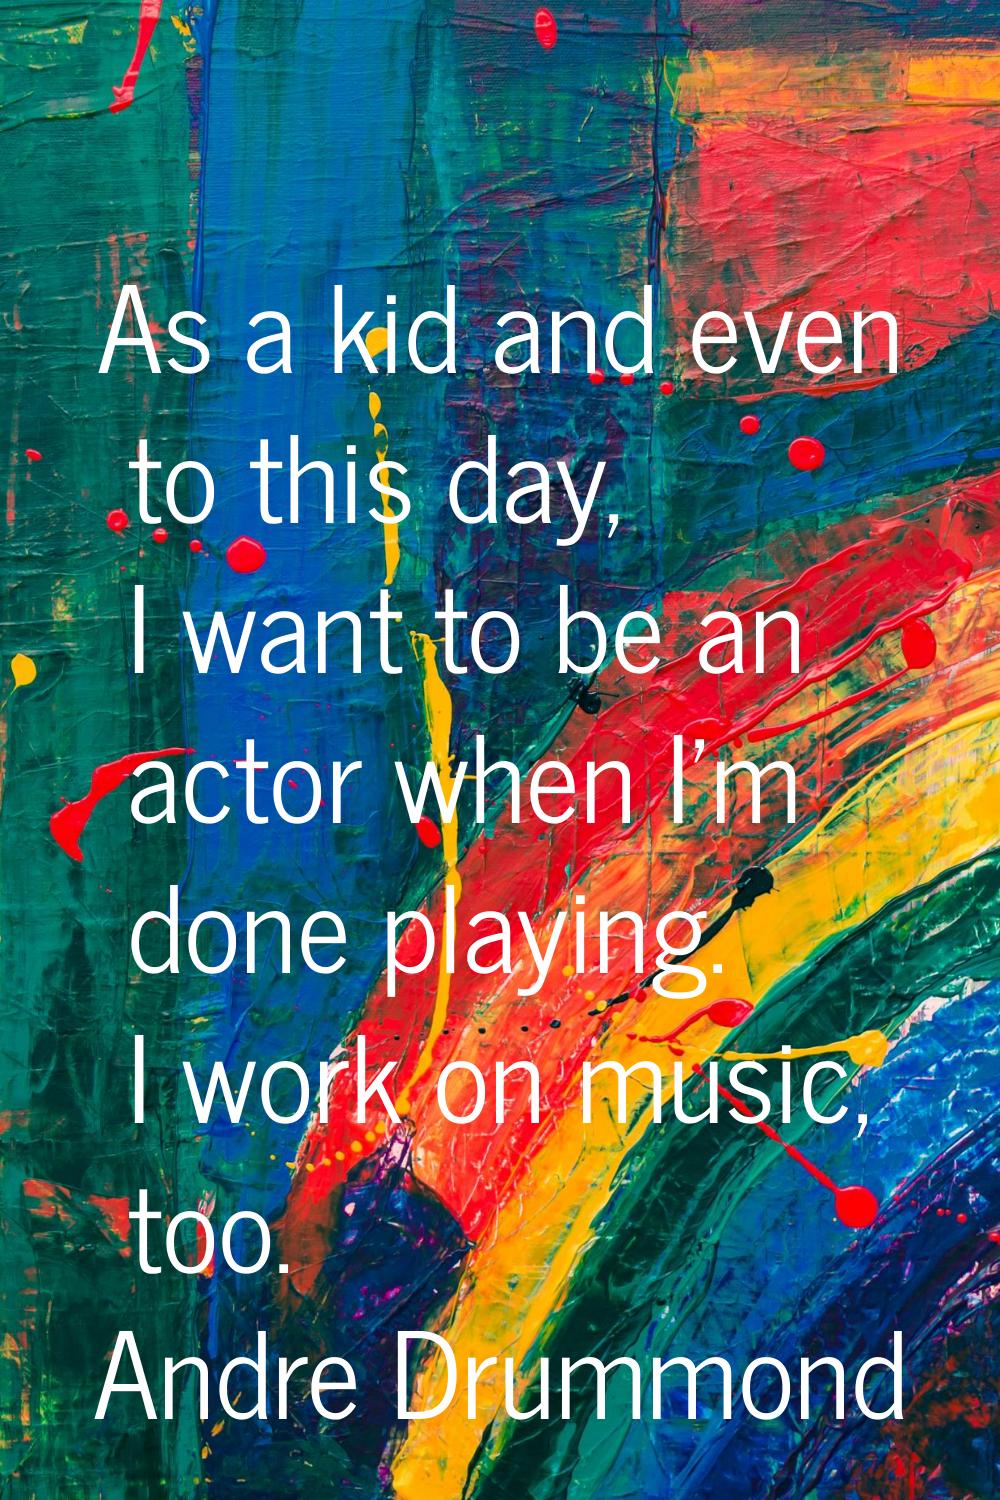 As a kid and even to this day, I want to be an actor when I'm done playing. I work on music, too.